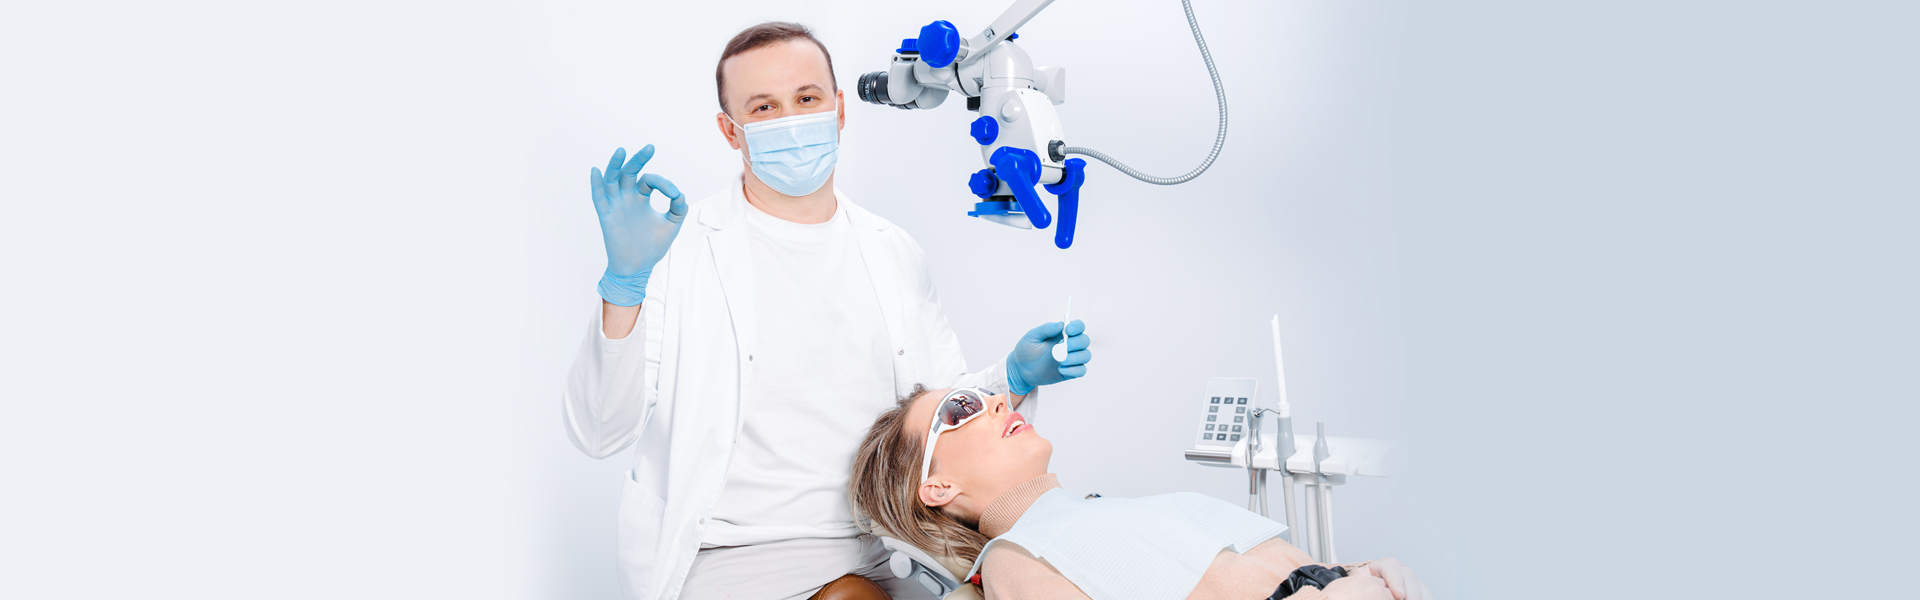 How to Prepare Yourself Before Oral Surgery?